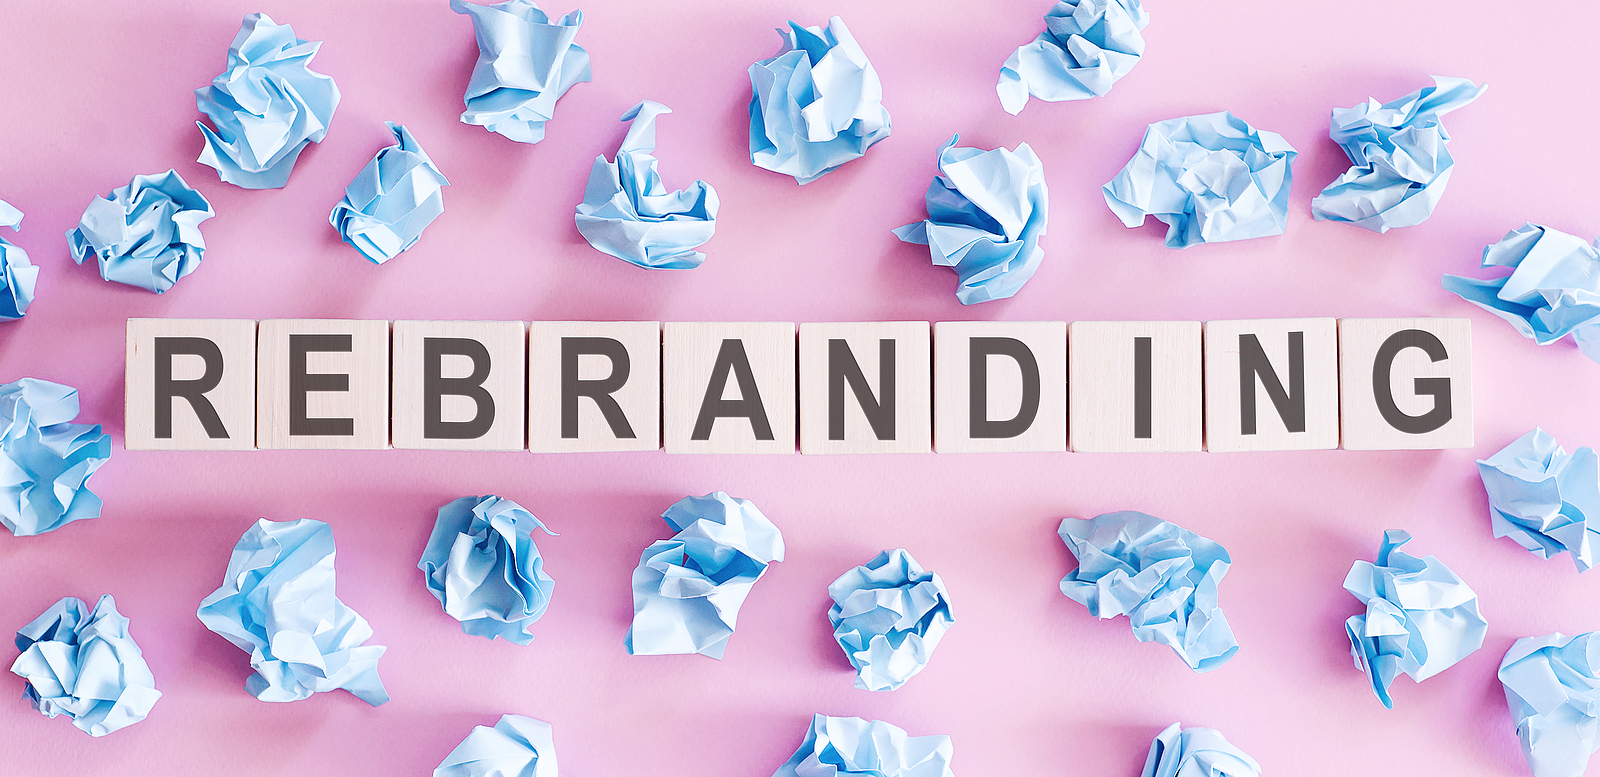 Rebranding written on white blocks on a pink background with crumpled balls of blue paper.